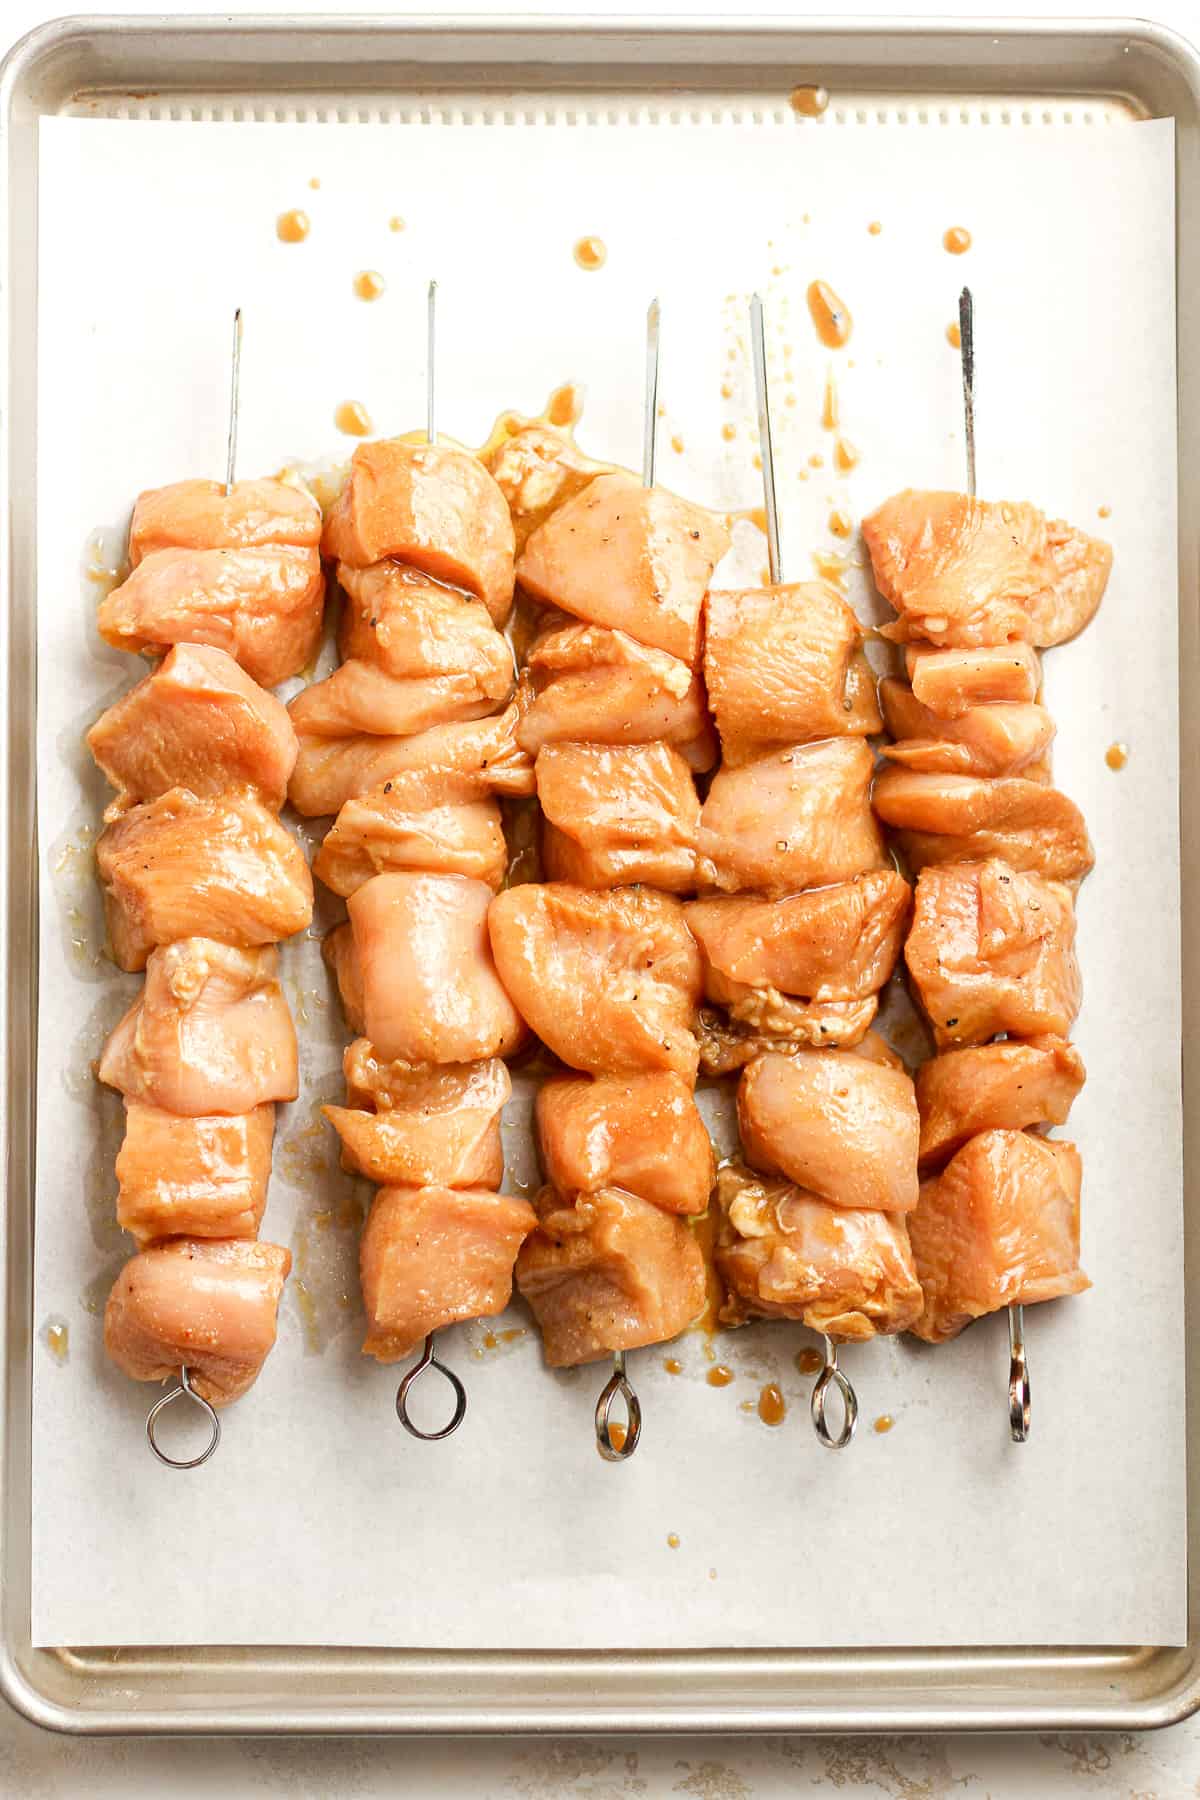 A pan of raw skewered and marinated chicken.